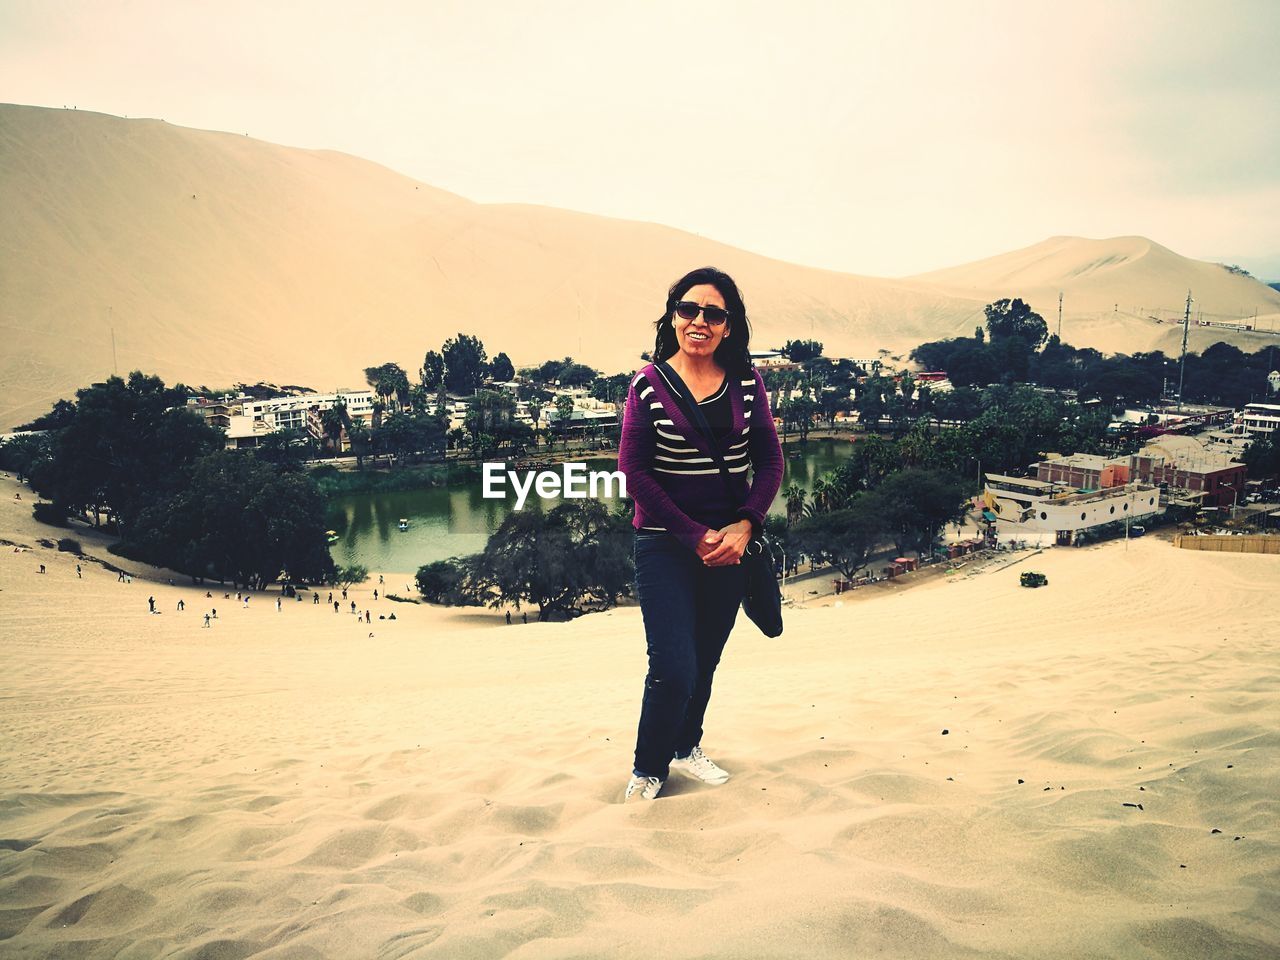 Portrait of woman in sunglasses standing on desert at oasis